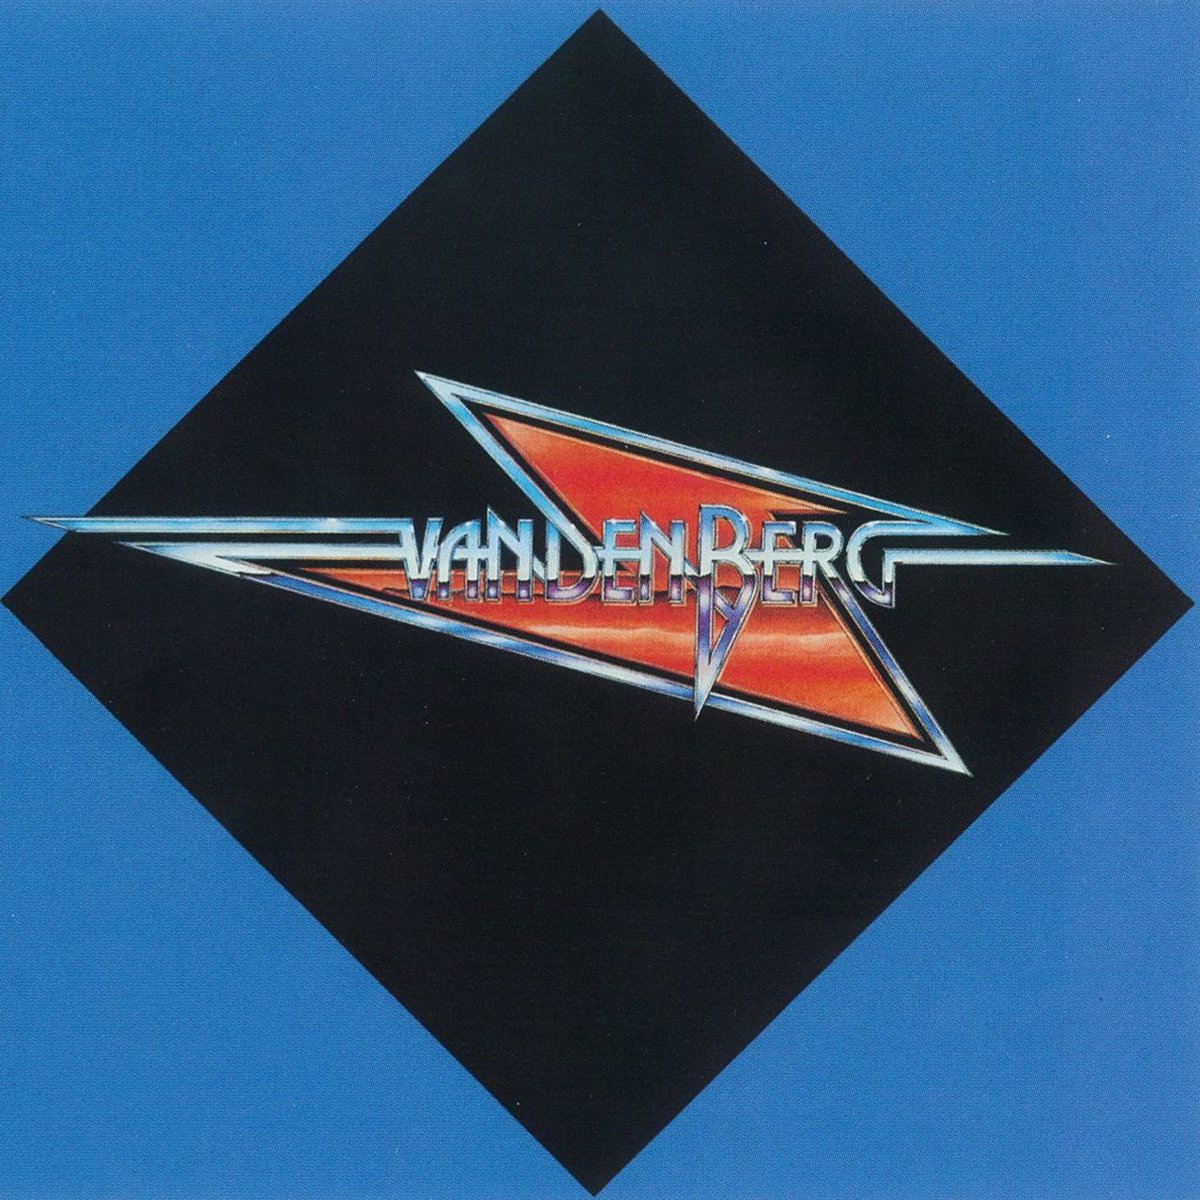 #BeginningsAndEndings
Day 3 - A favourite album opener from the '80s

Your Love Is in Vain by Vandenberg
From the album Vandenberg (1982)
 tidal.com/track/4083756?u